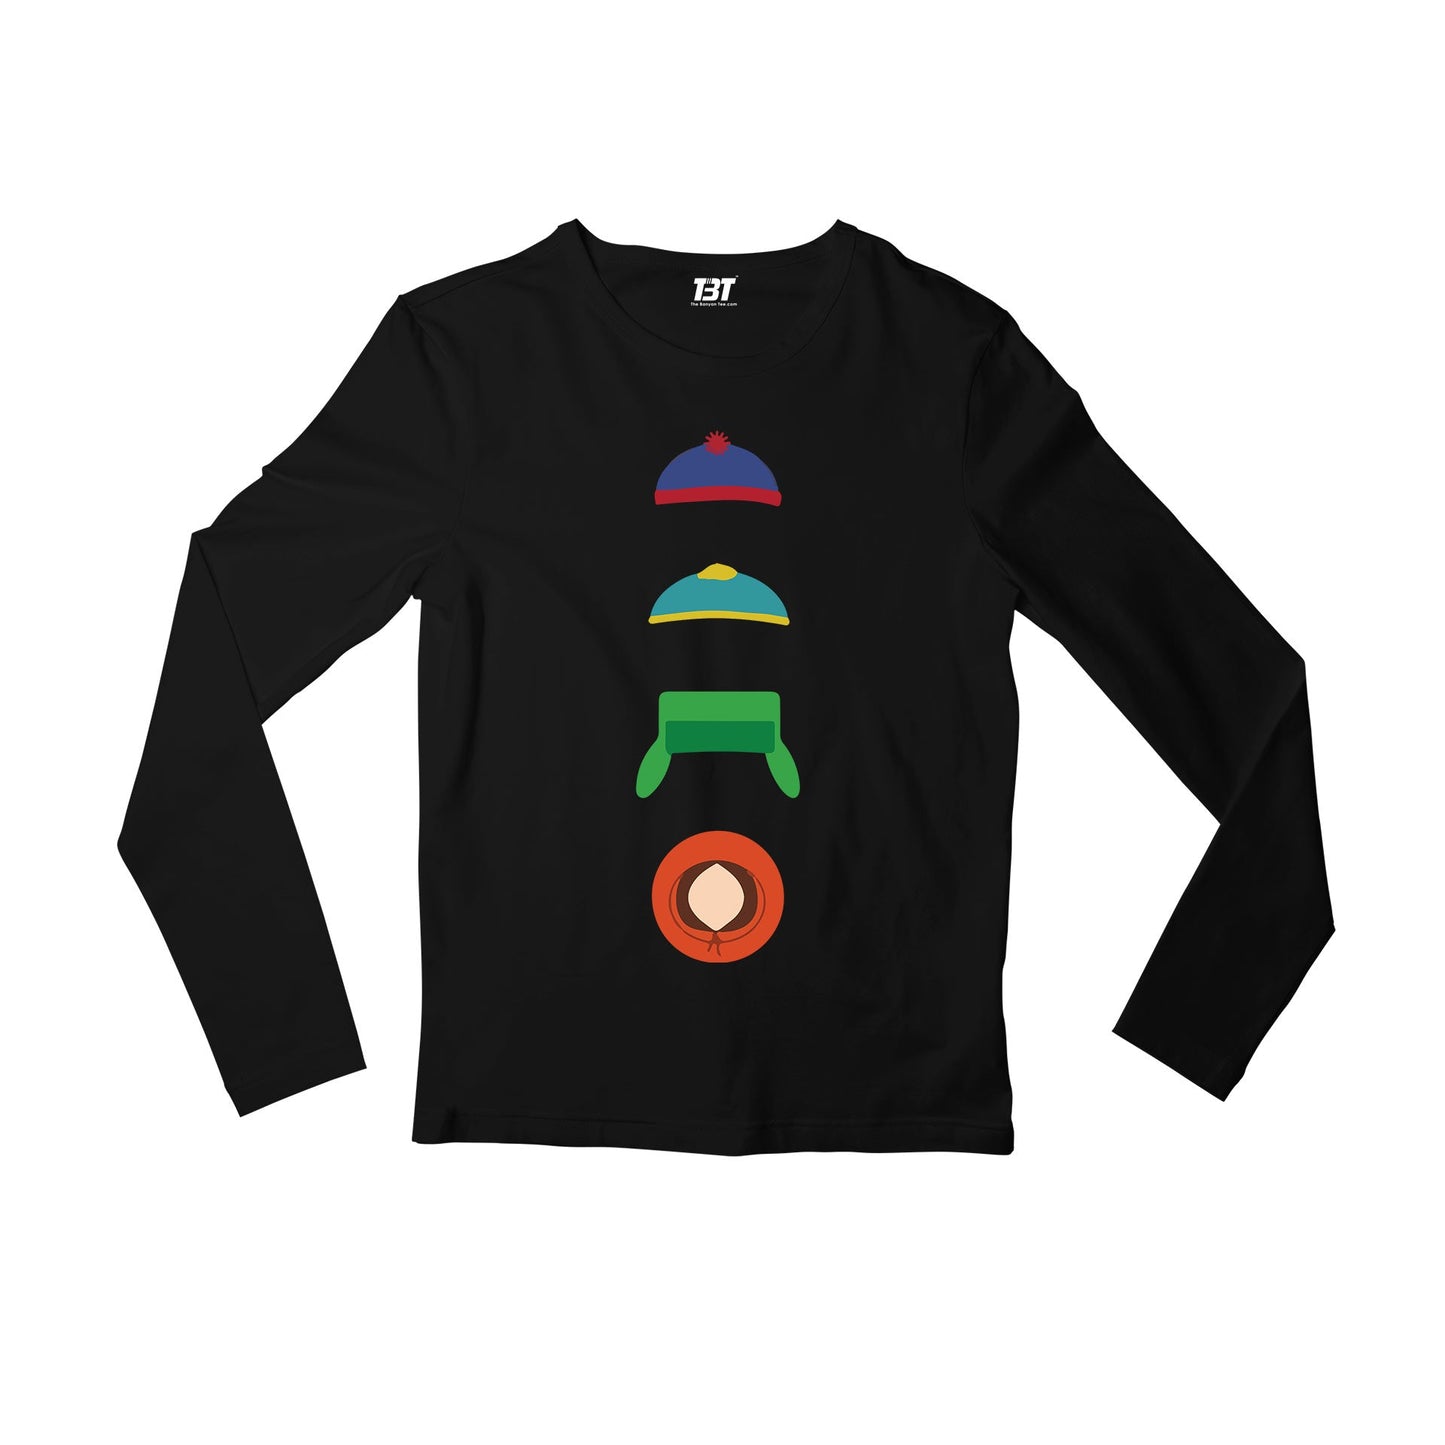 south park the hats full sleeves long sleeves tv & movies buy online india the banyan tee tbt men women girls boys unisex black south park kenny cartman stan kyle cartoon character illustration